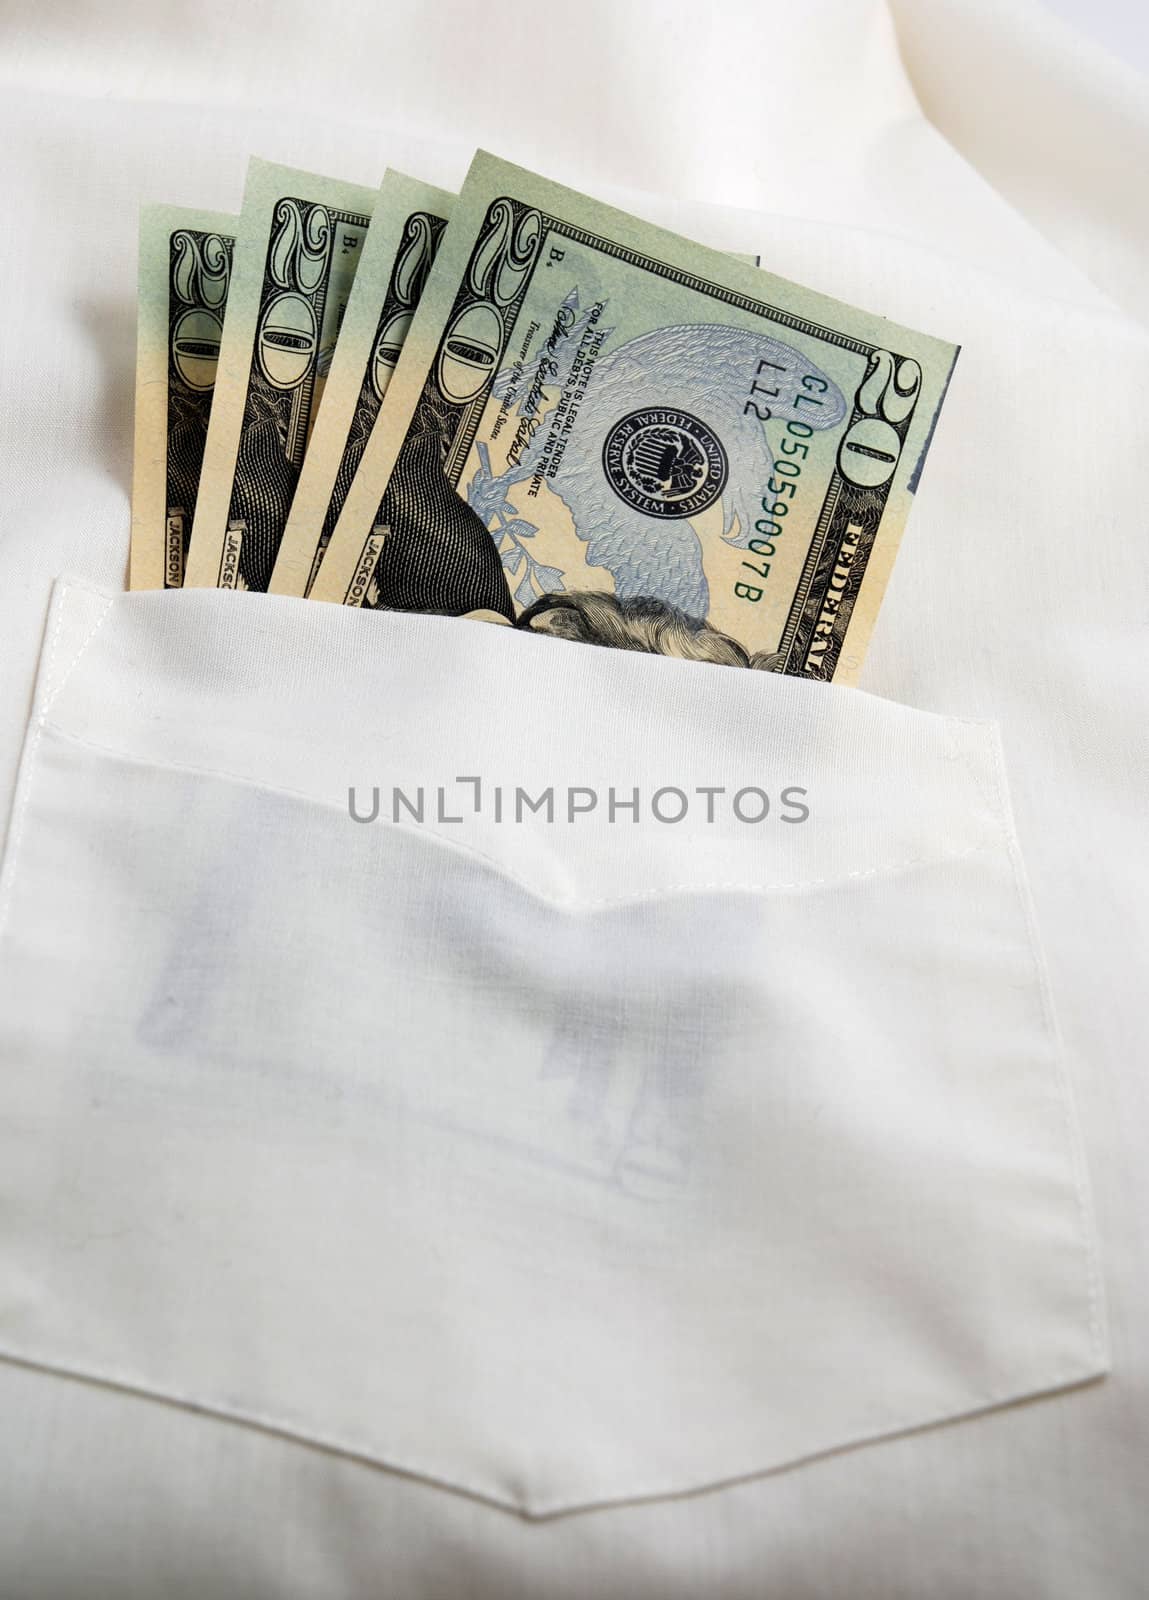  pictures of several twenty dollar bills in the pocket of a shirt